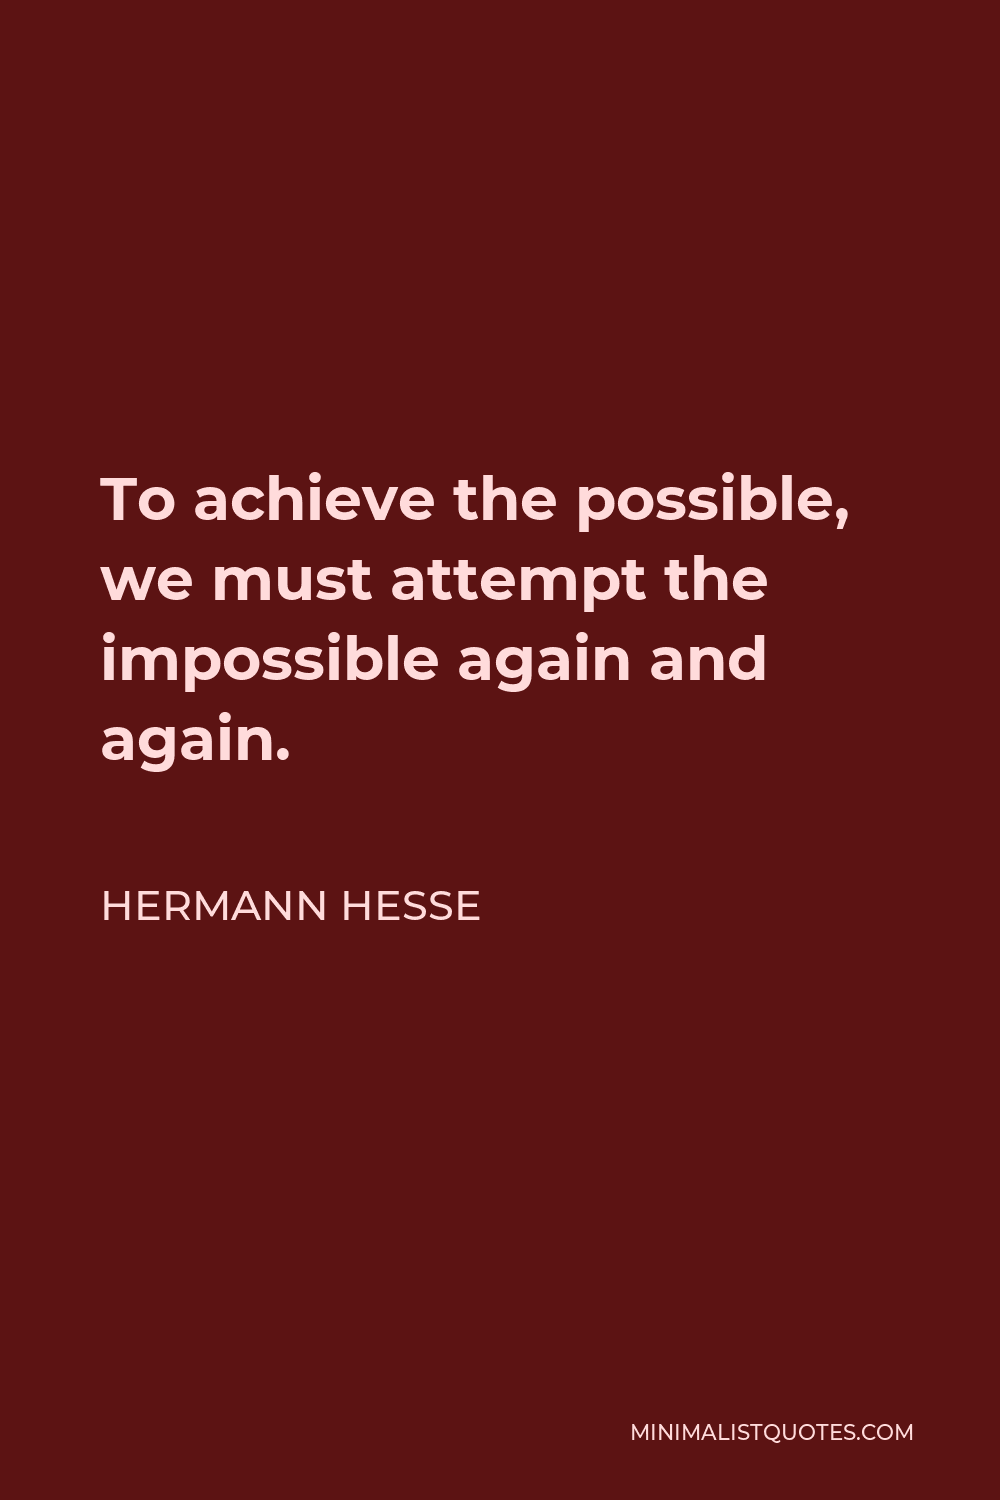 Hermann Hesse Quote - To achieve the possible, we must attempt the impossible again and again.